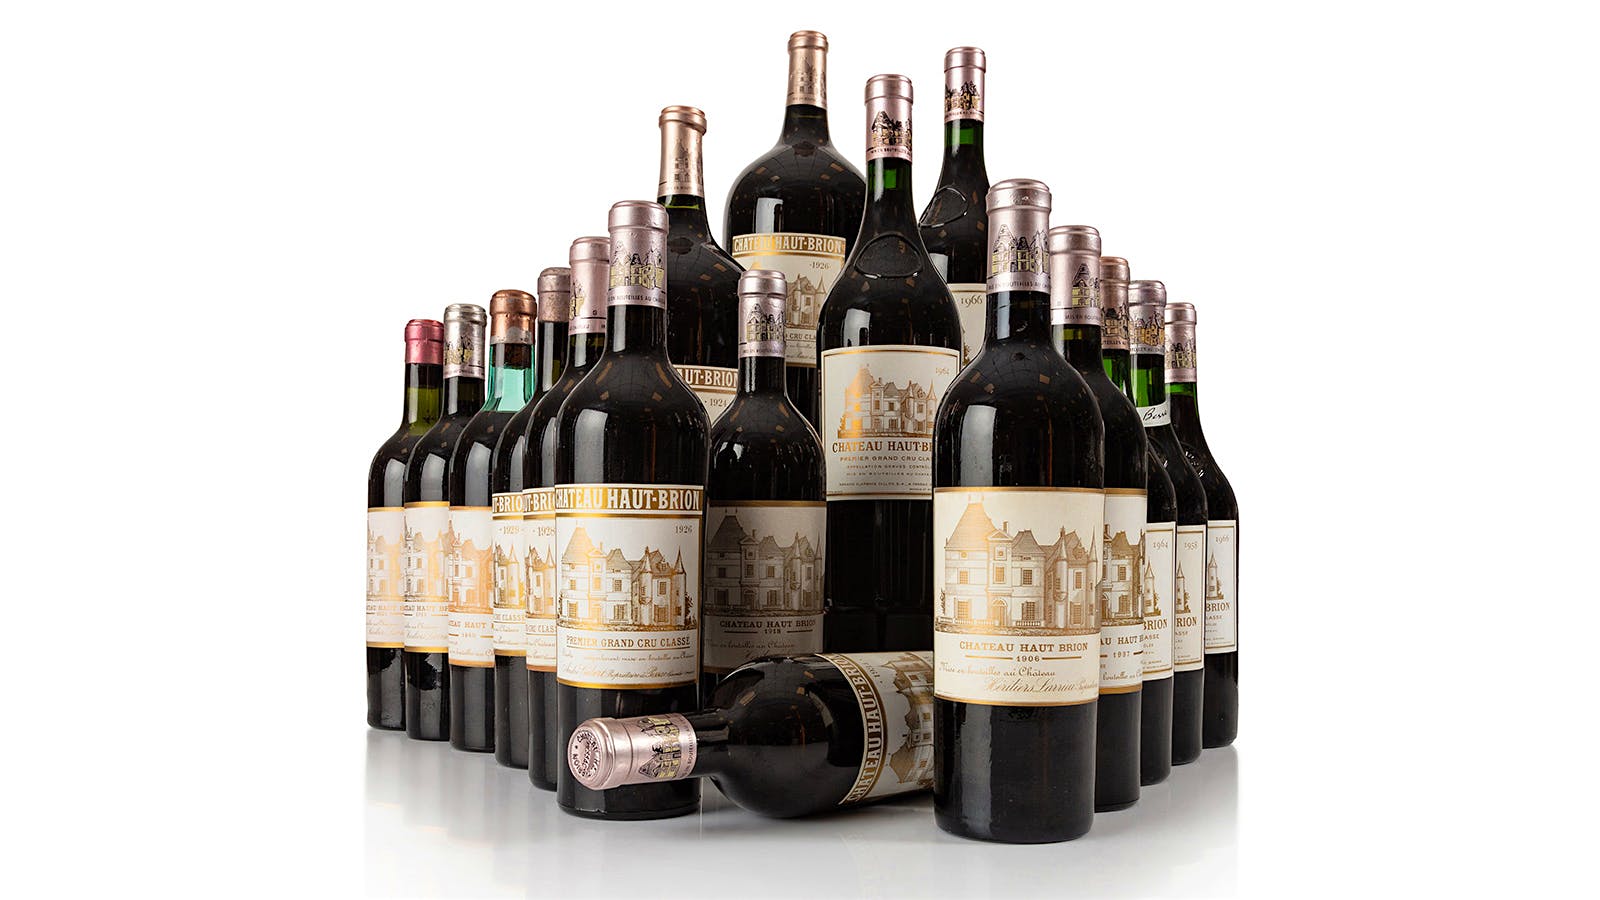 Prince Robert de Luxembourg Auctions Wines Straight from Haut-Brion's Cellars for a Cause Close to Home